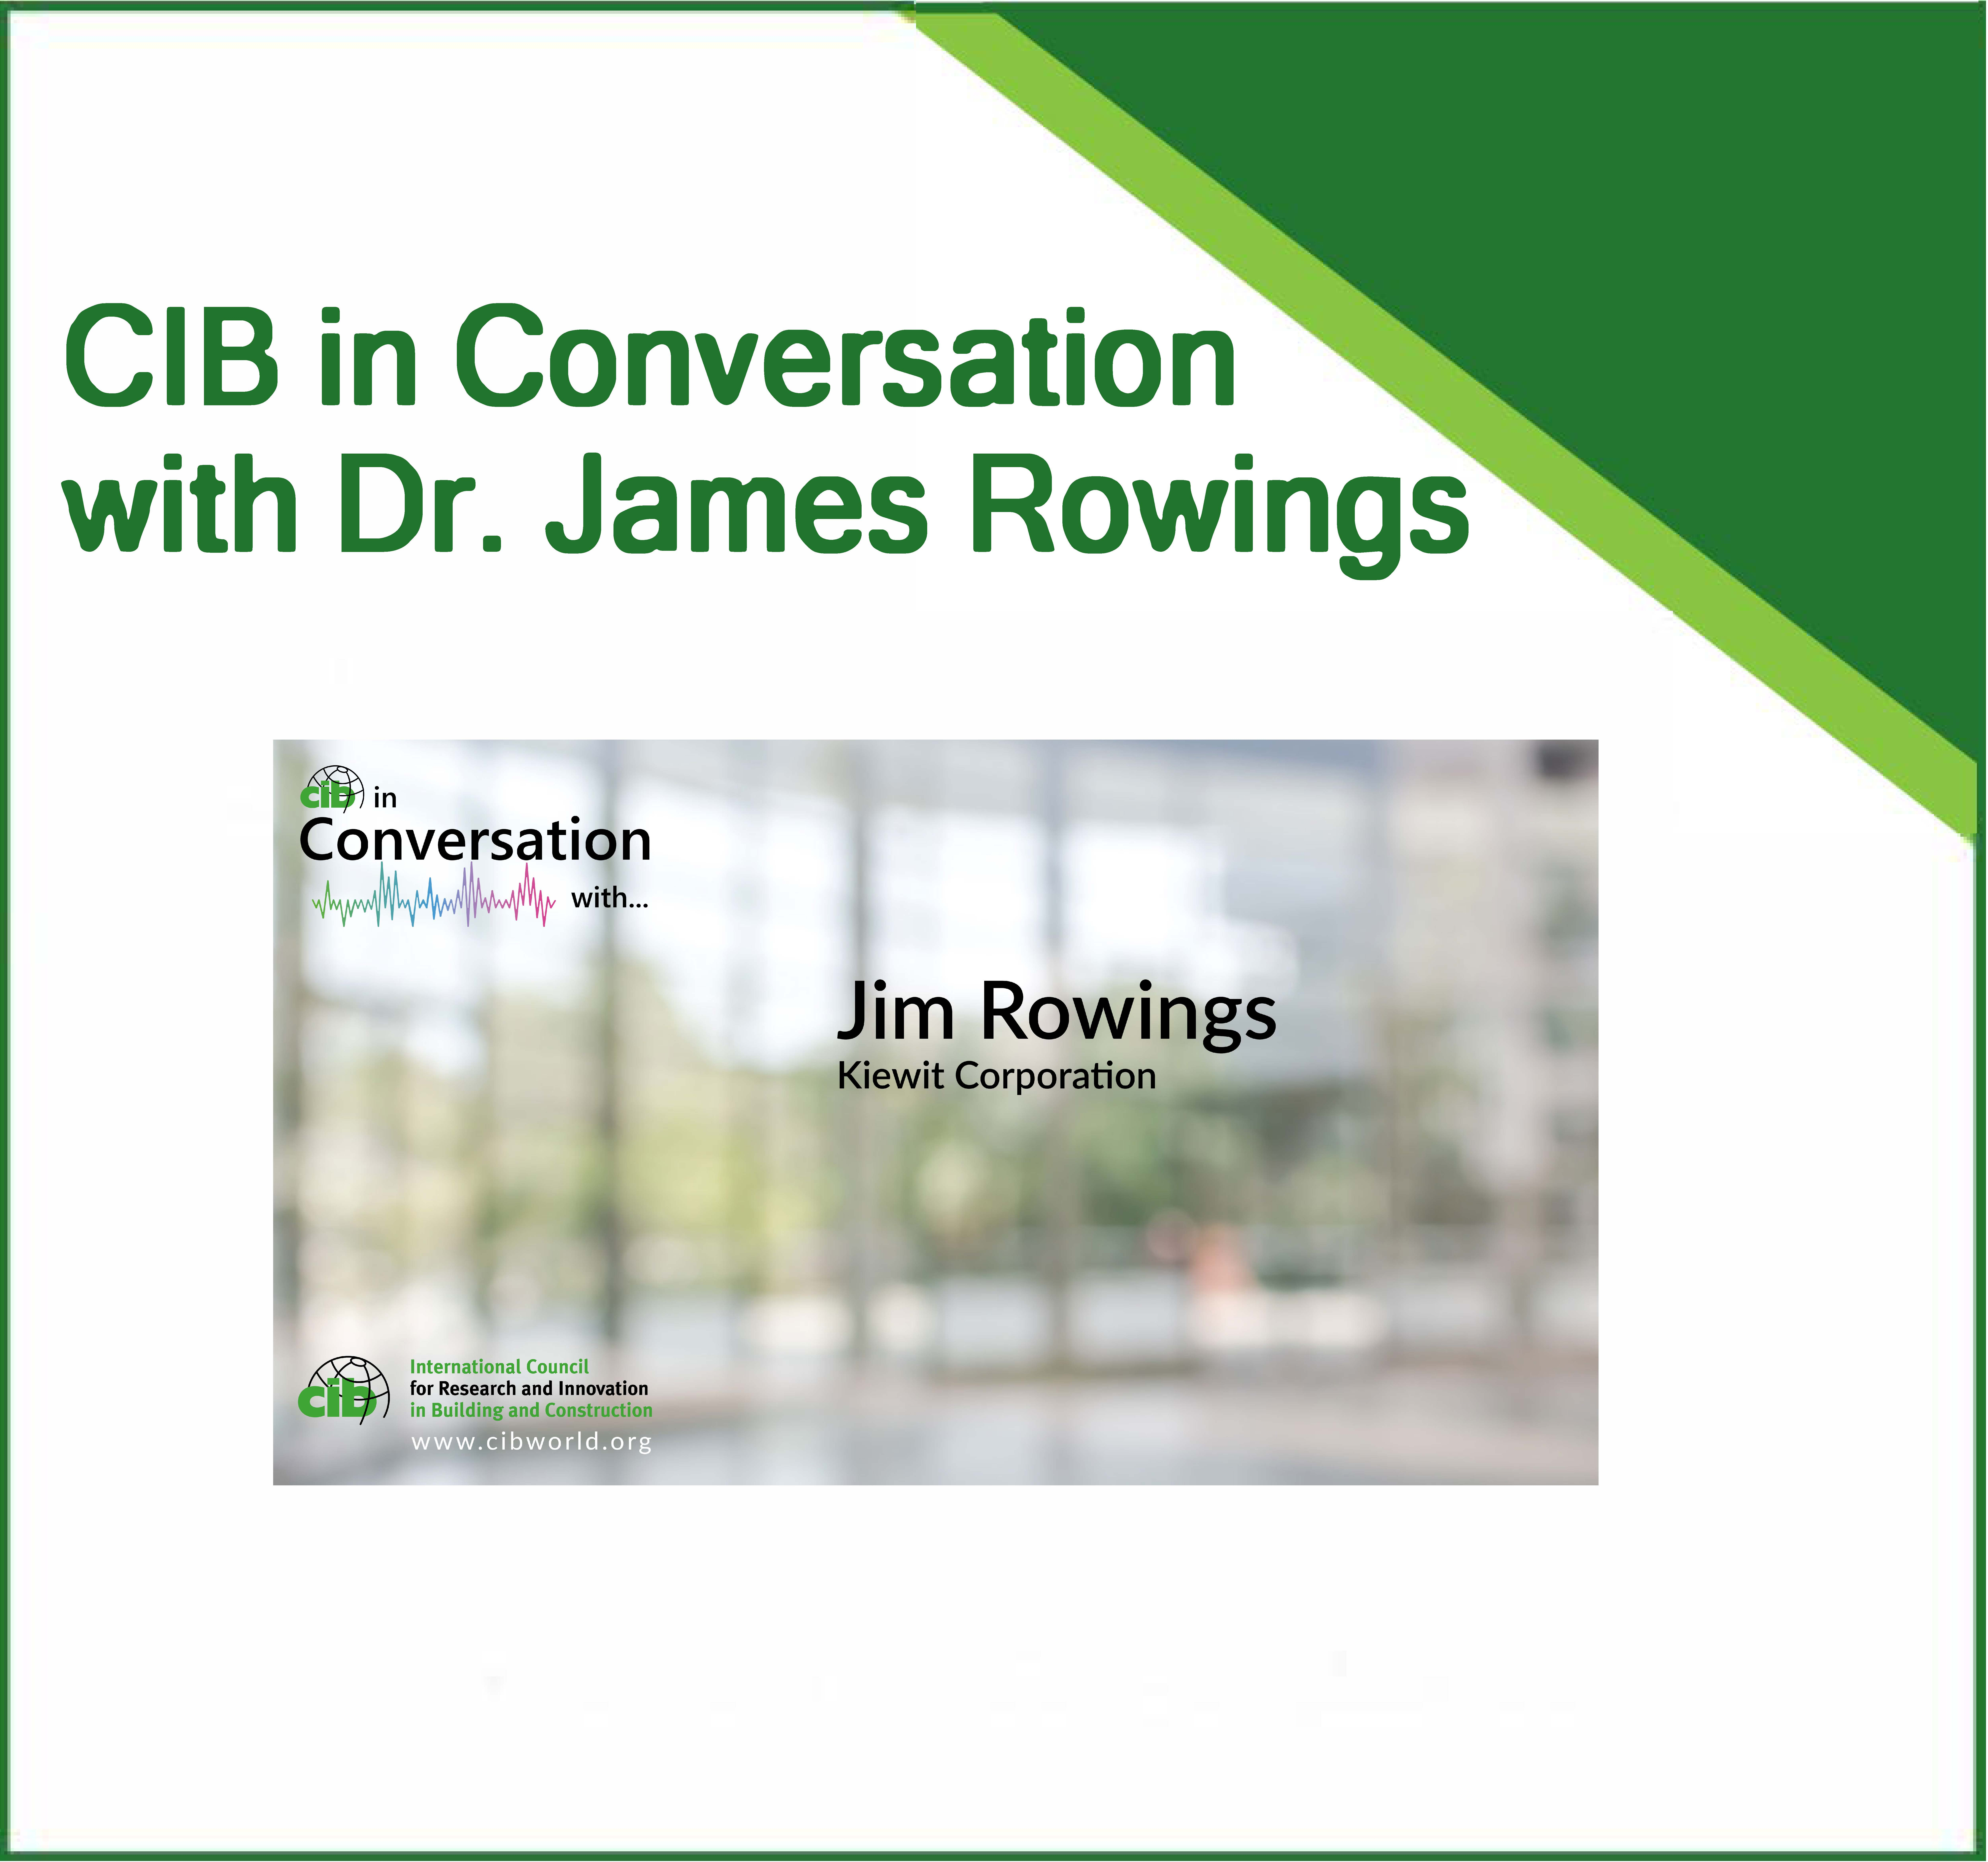 CIB in Conversation with Dr. James Rowings